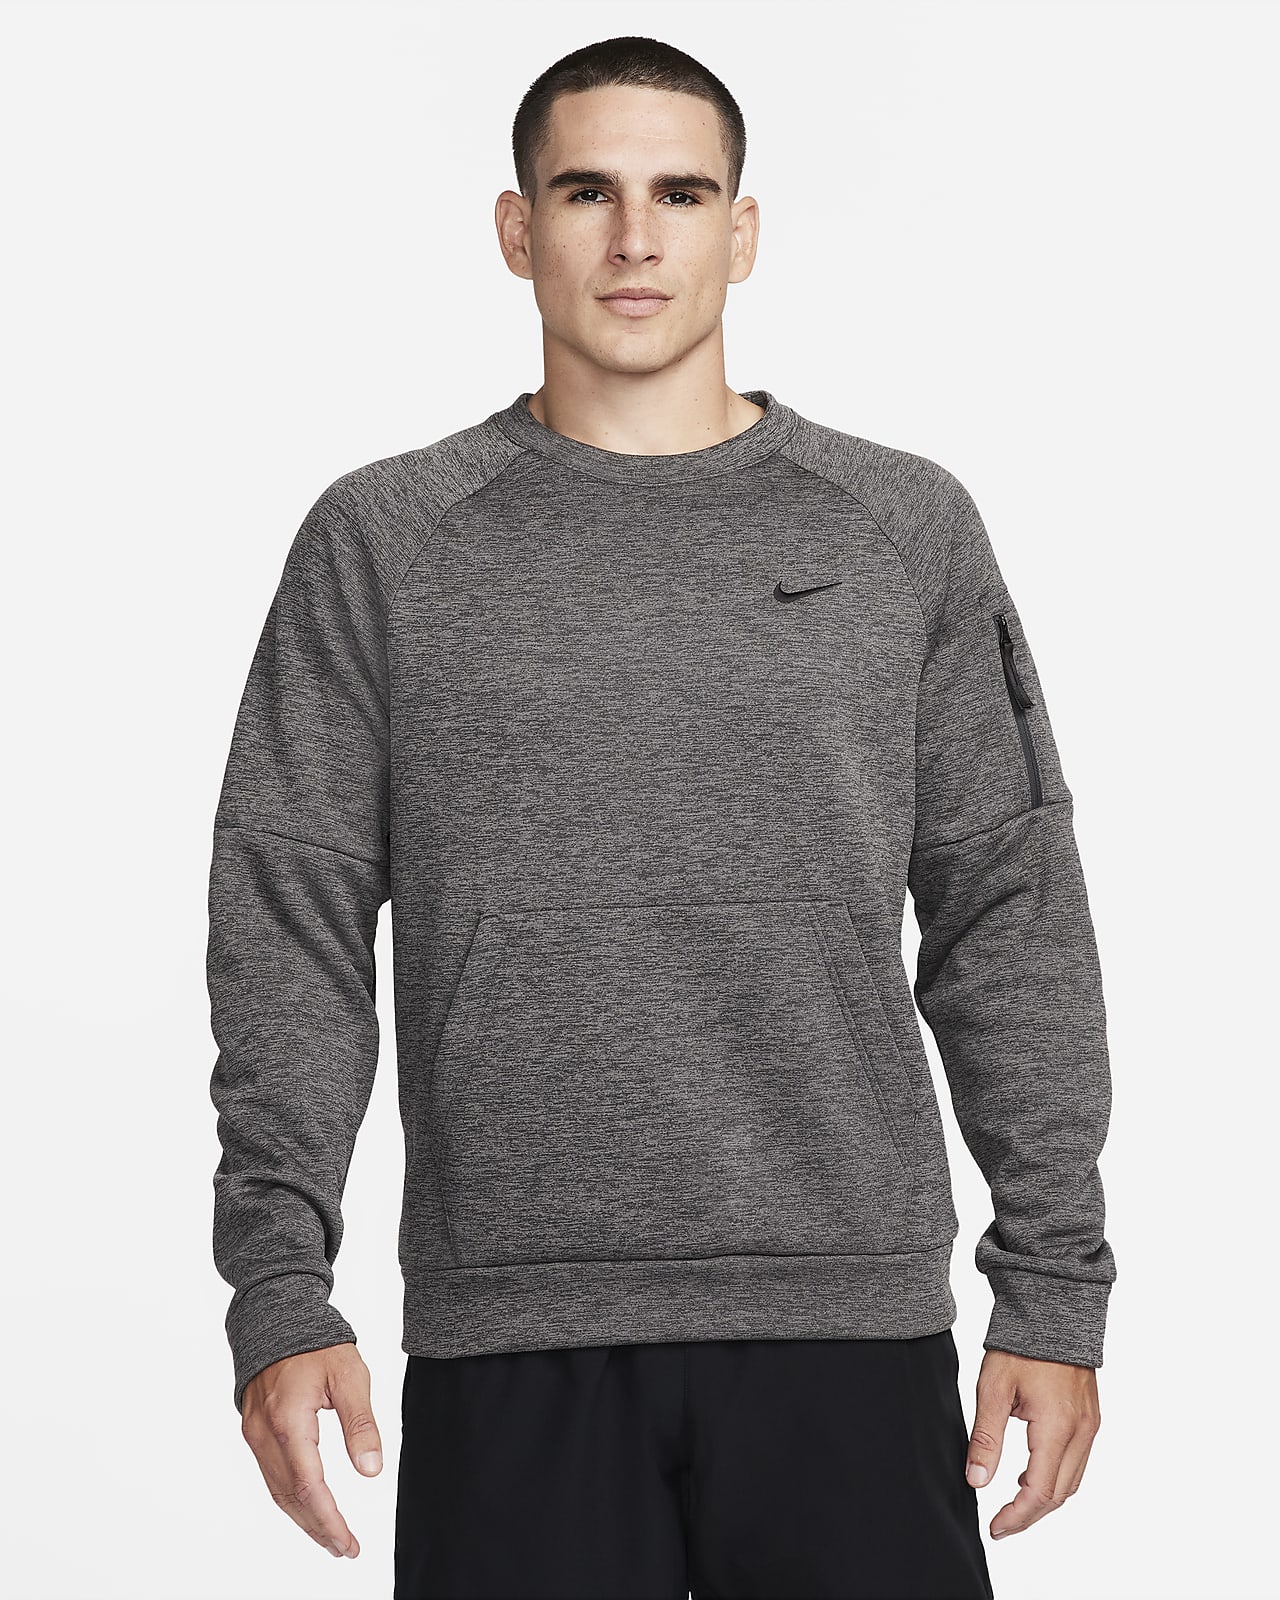 Nike Men's Therma-FIT Fitness Crew